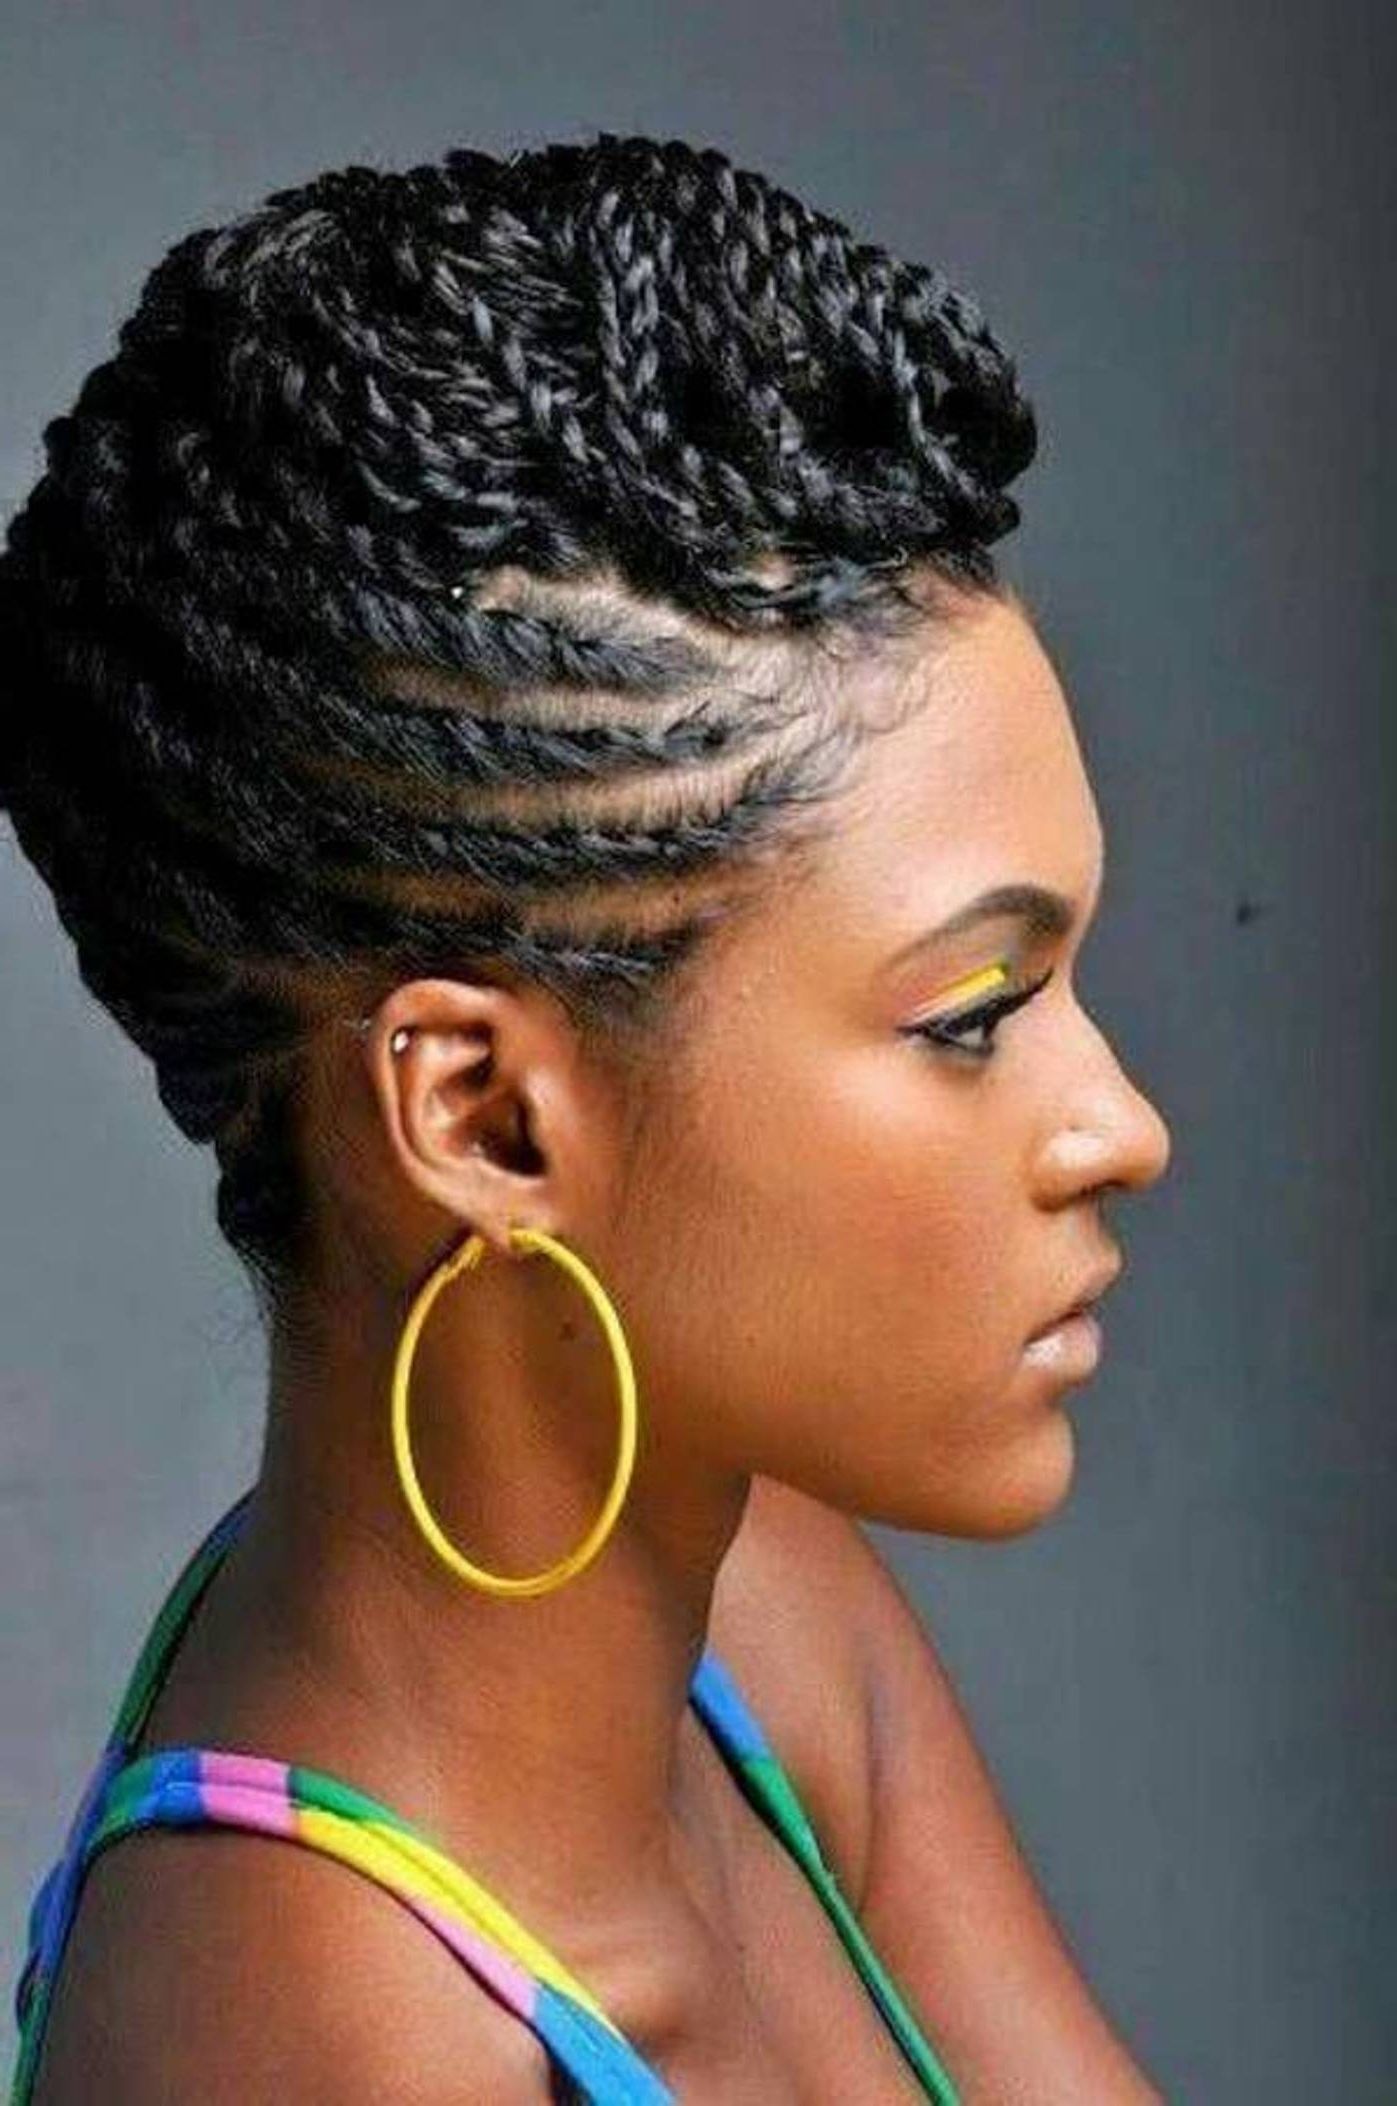 Well Liked Braided Hairstyles For Black Women Regarding 25 Updo Hairstyles For Black Women (View 10 of 15)